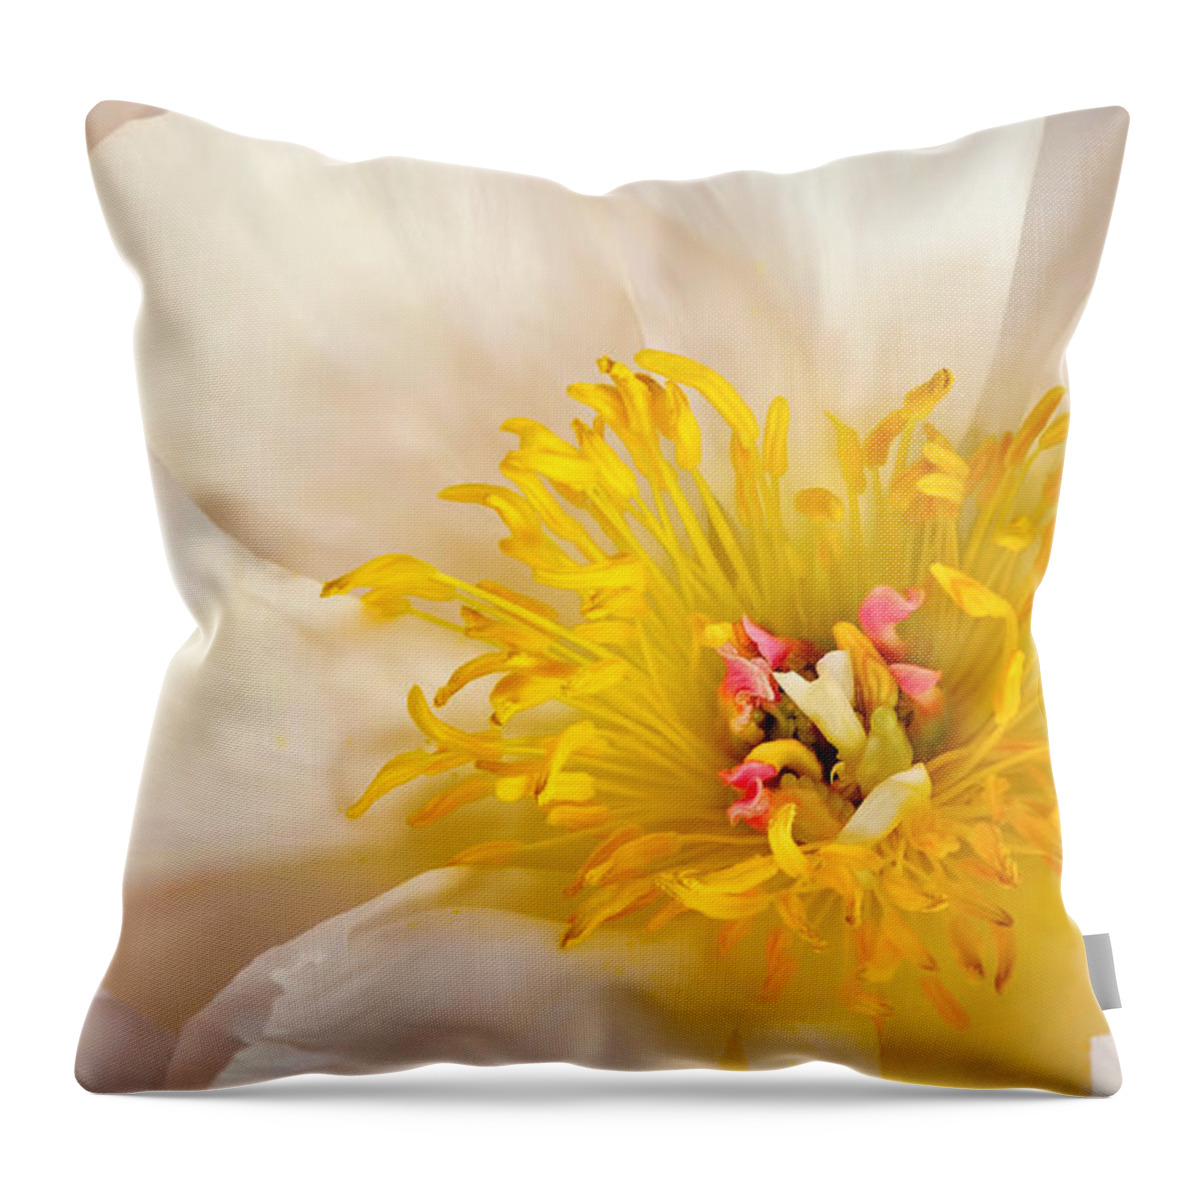 Peony Throw Pillow featuring the photograph Paeonia by Carol Eade